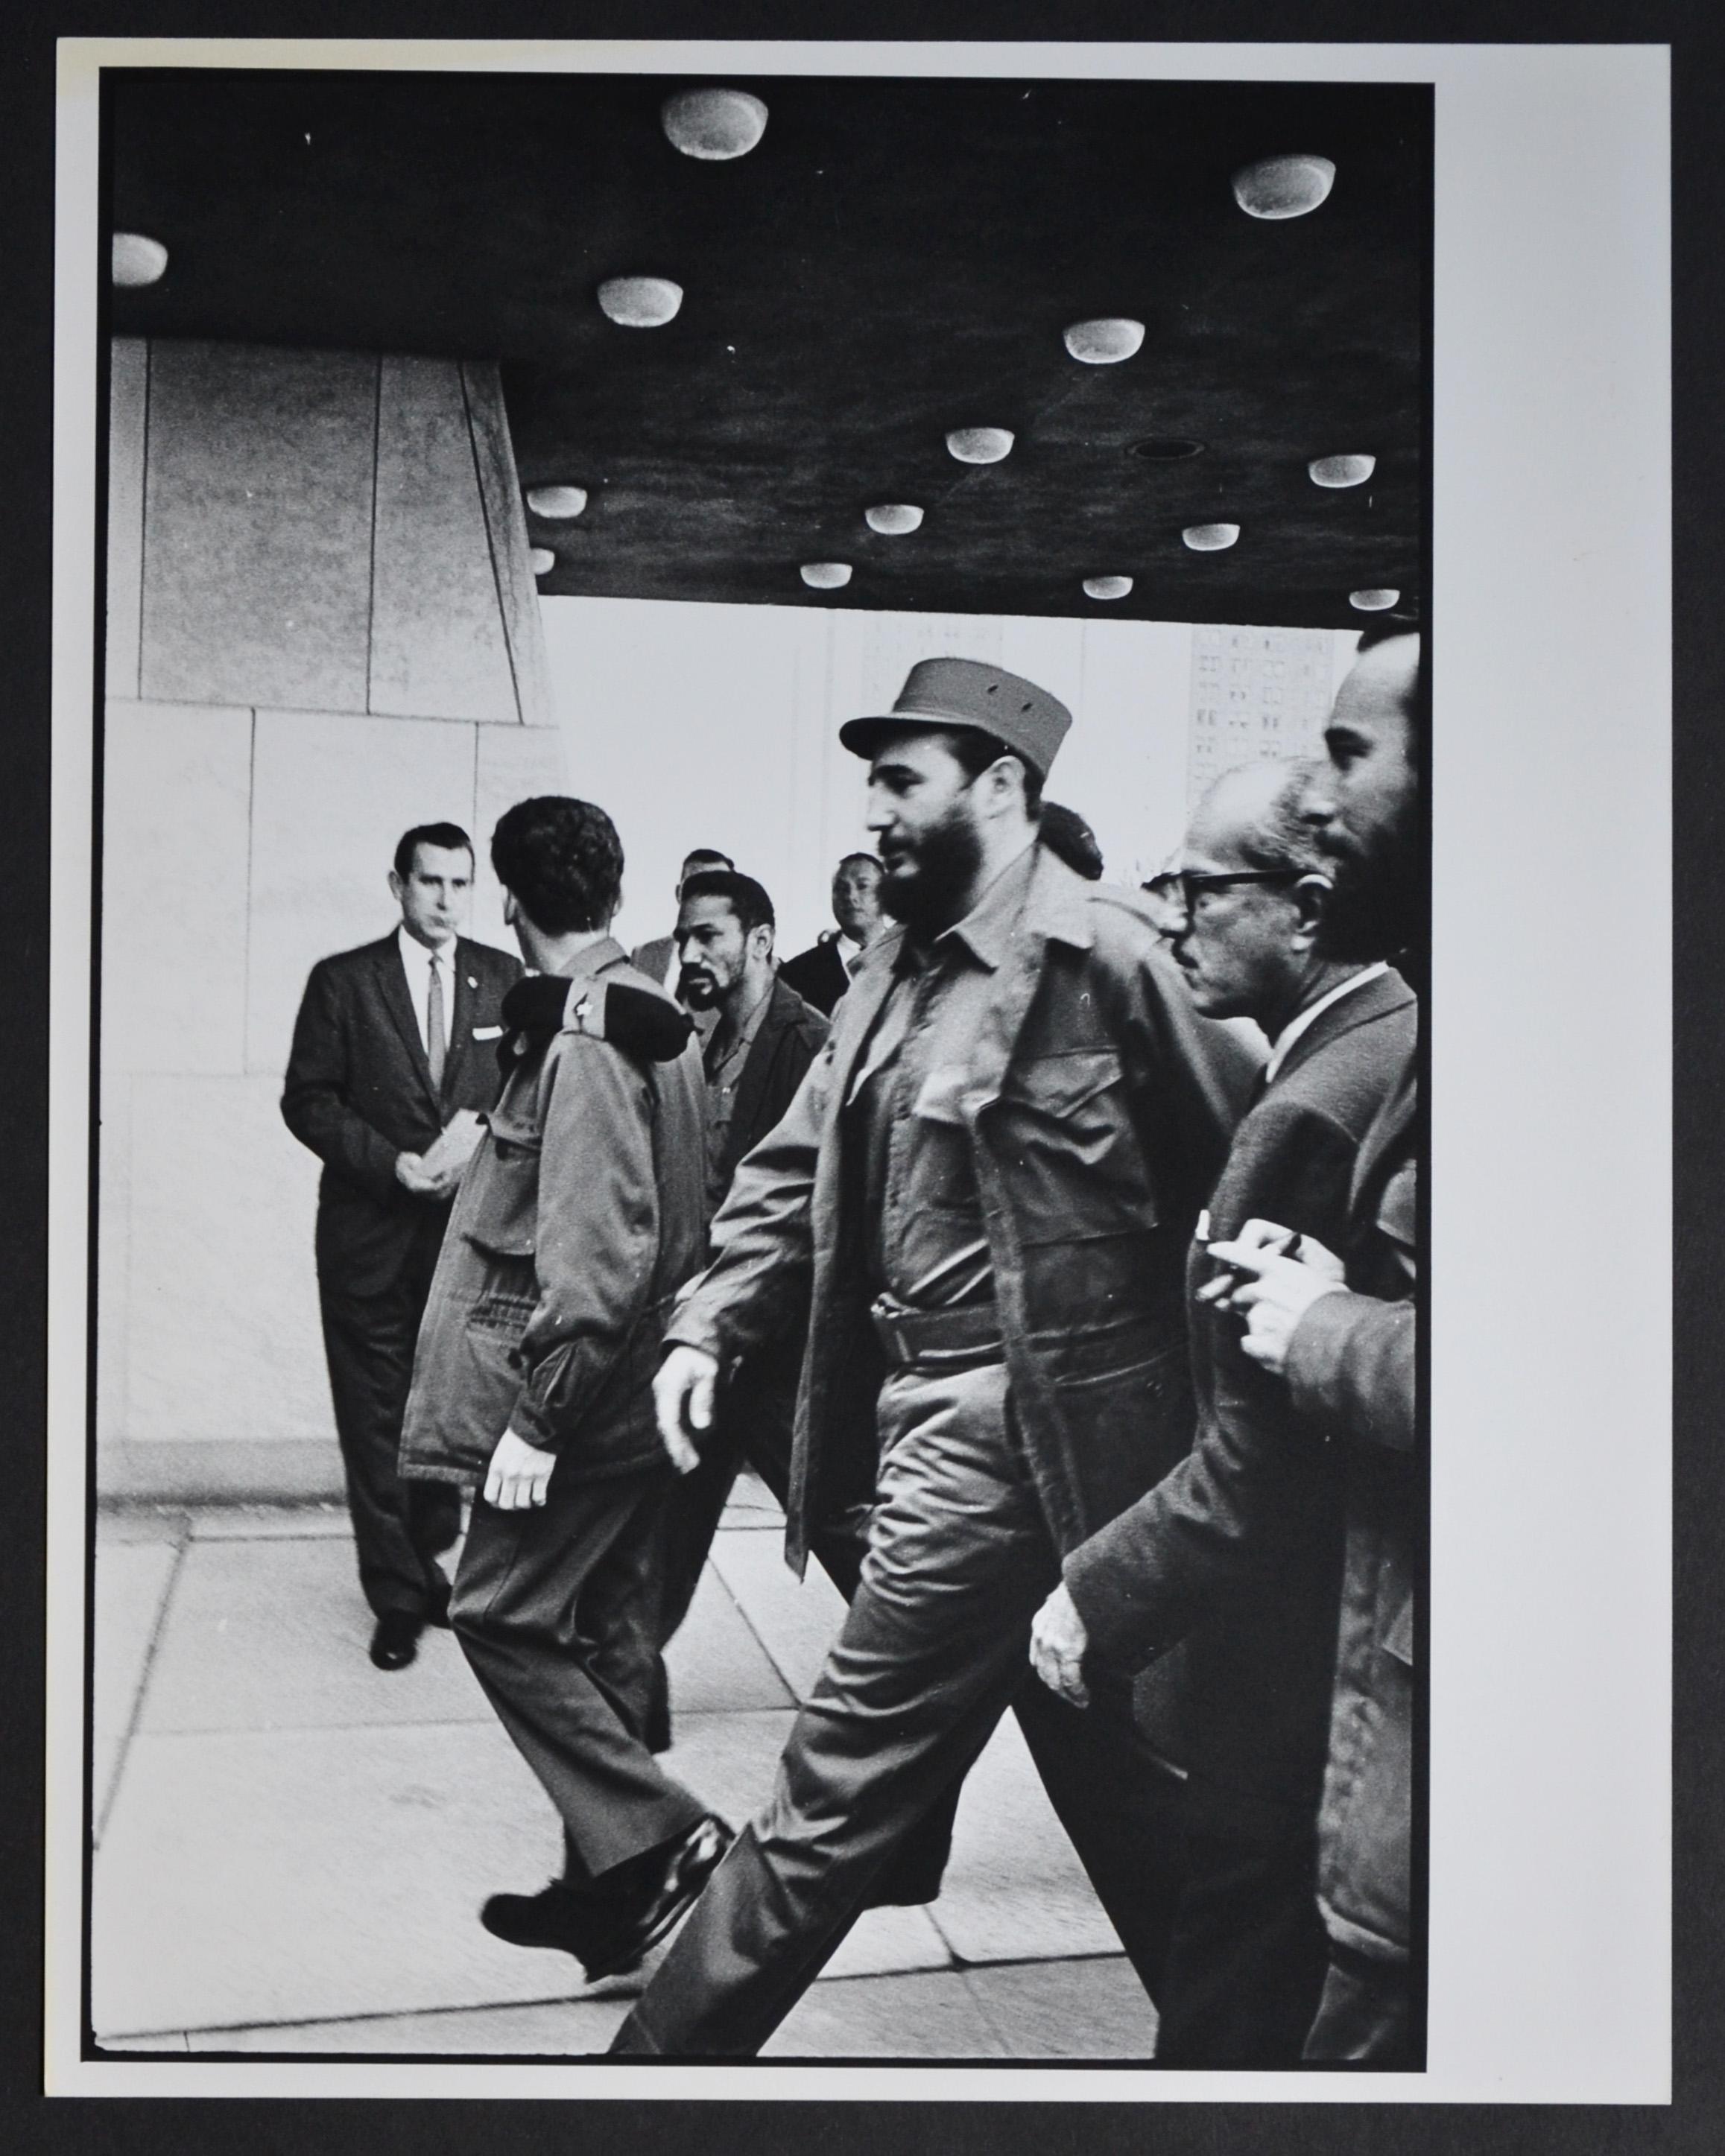 Rolf Gillhausen Black and White Photograph - Fidel Castro entering buidling, Cuba 1950s.